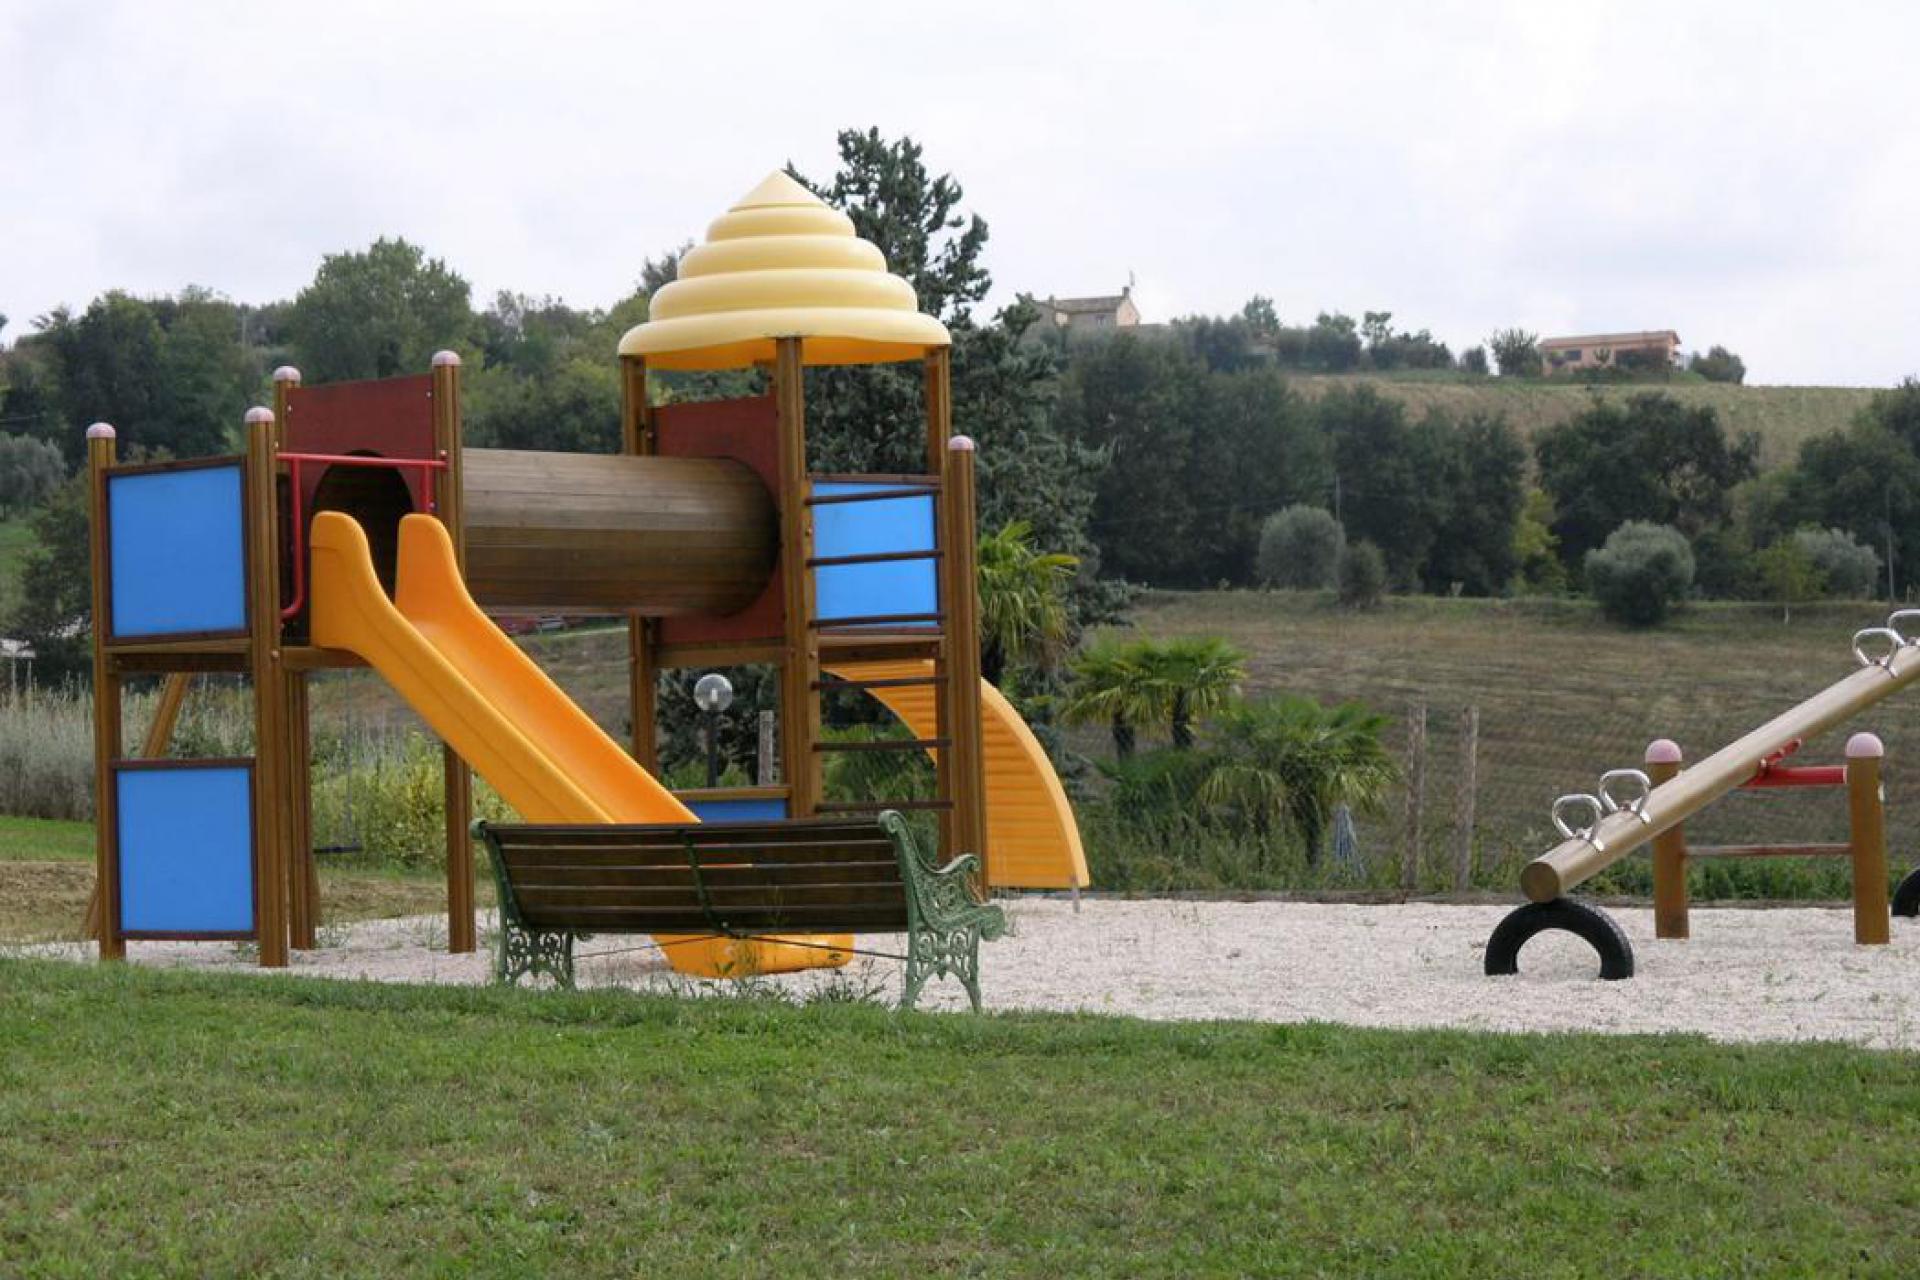 Agriturismo Marche Agriturismo Marche, rural location and child-friendly